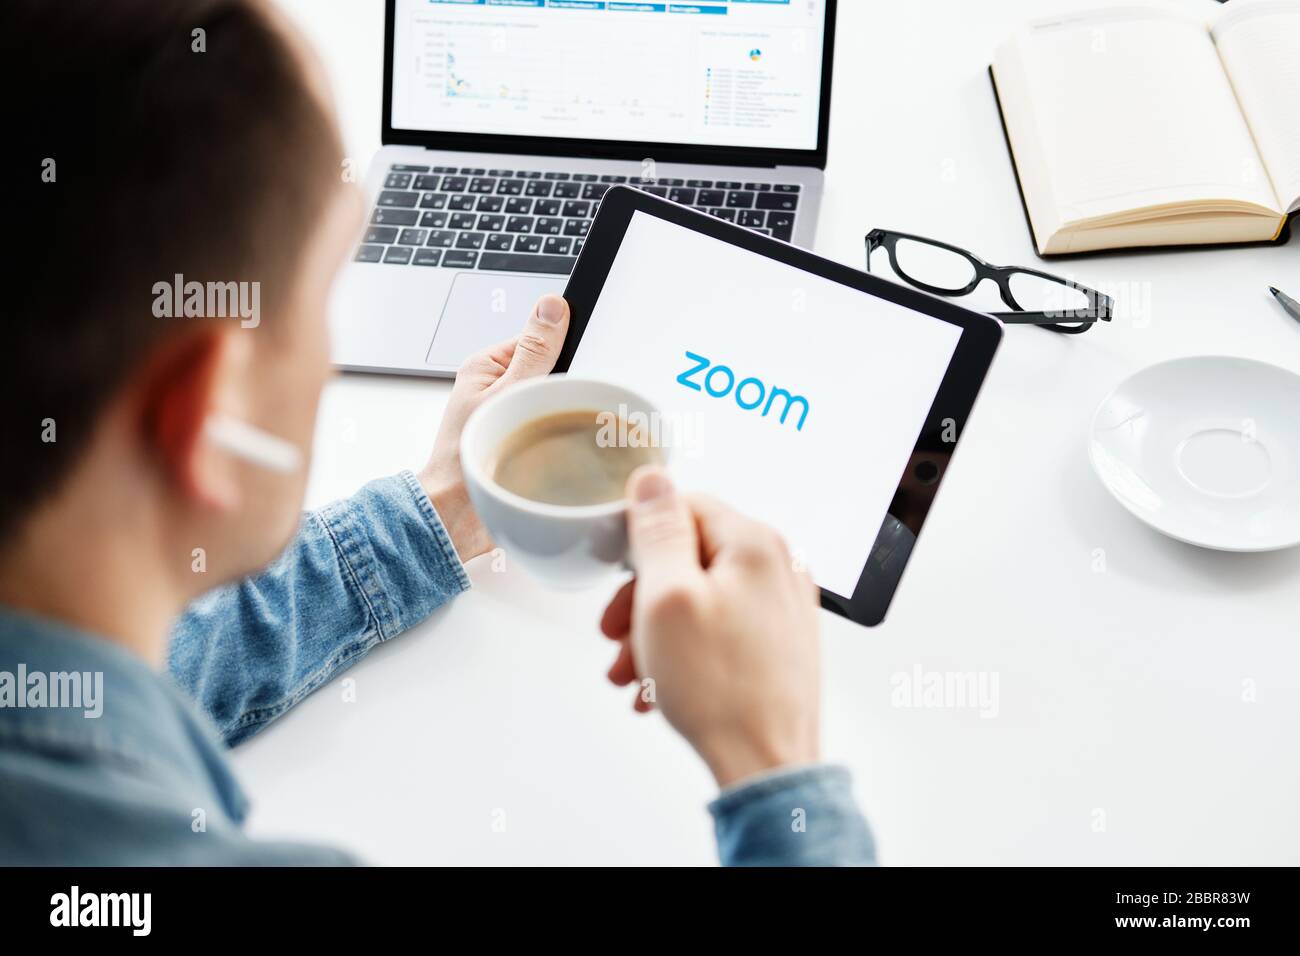 Tyumen, Russia - March 25, 2020: ZOOM Cloud Meetings. Video conferencing software. Video calling and communications Stock Photo